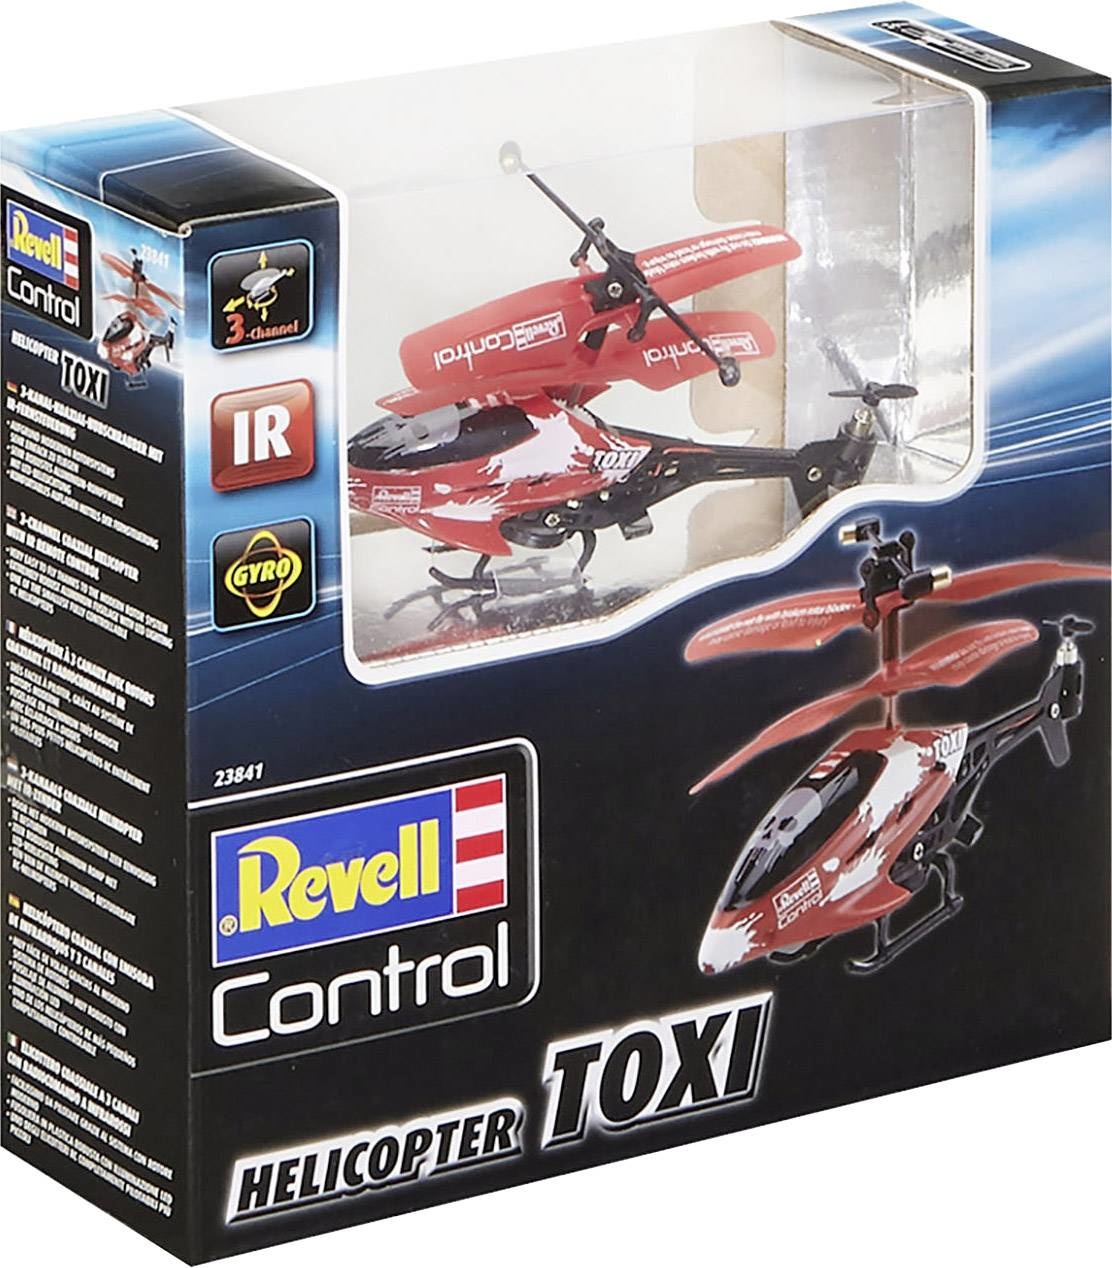 Revell Helicopter toxi